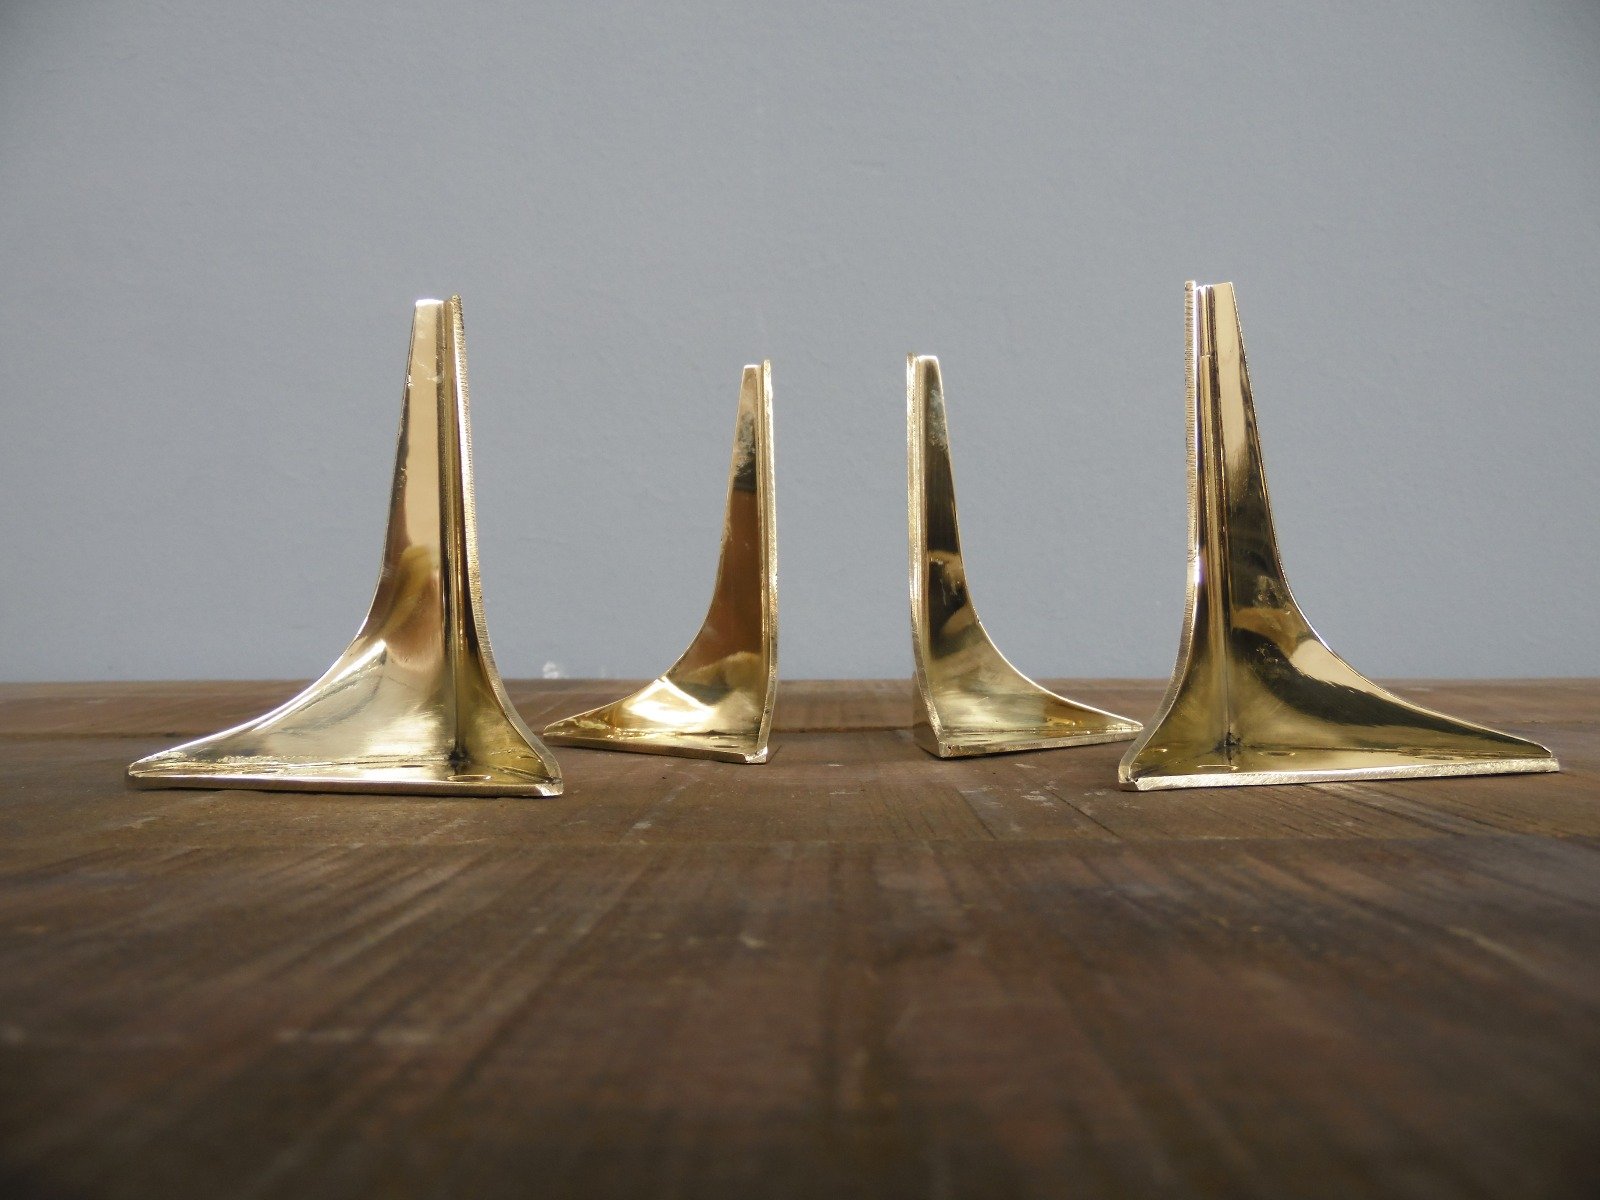 wings brass polished 6 small furniture legs